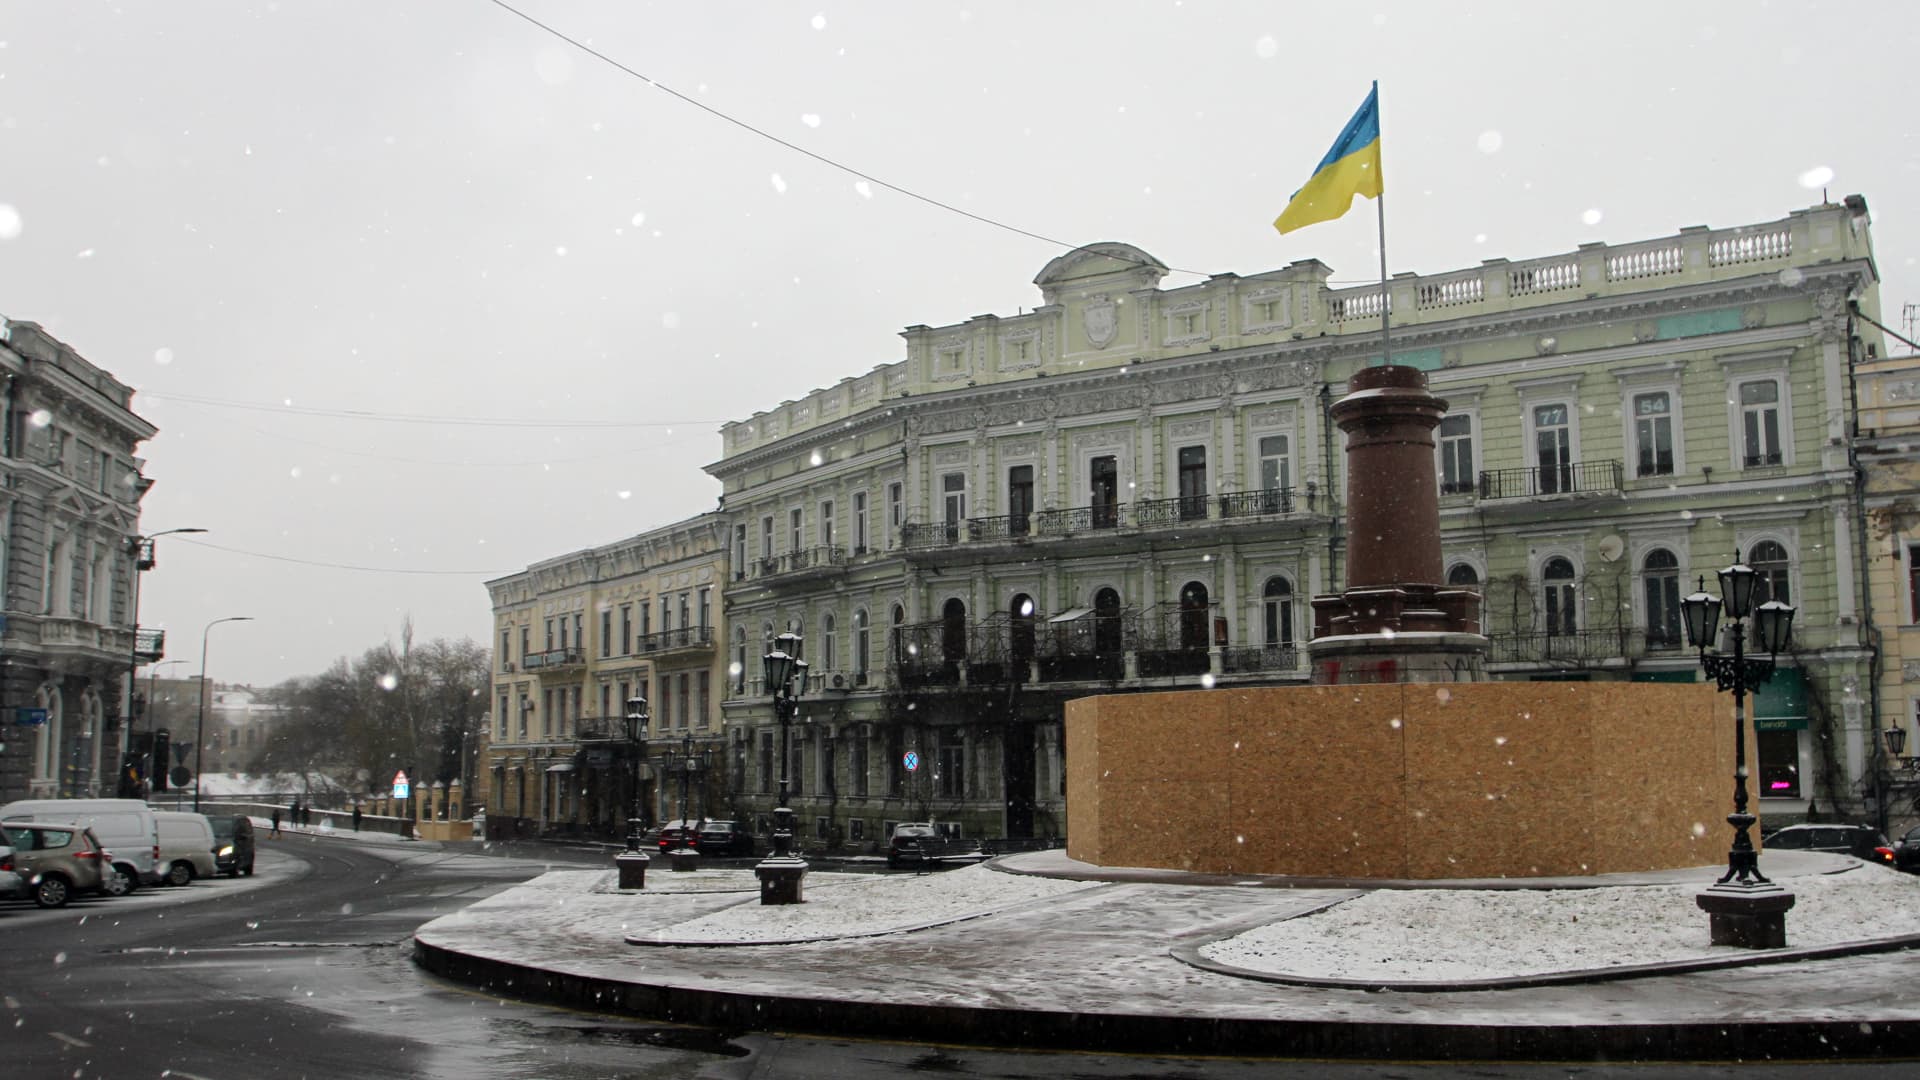 The Ukrainian state flag flies on a pedestal where the monument to Empress Catherine the Great of Russia, also known as Monument to the founders of Odesa, once stood on Jan. 8, 2023 in Odesa, Ukraine.